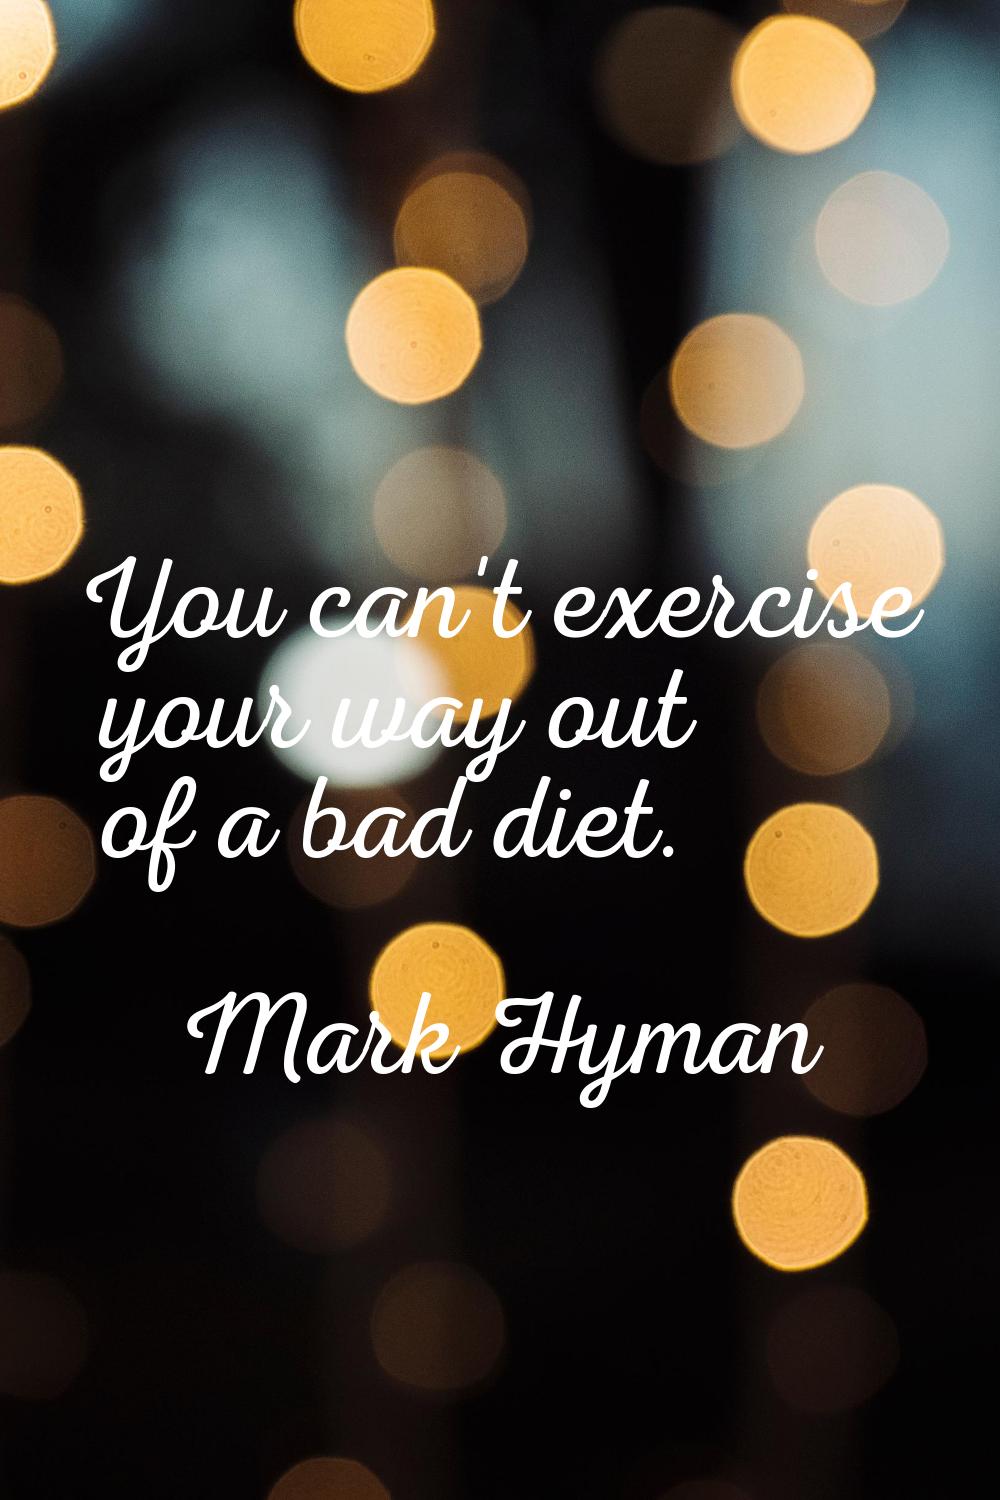 You can't exercise your way out of a bad diet.